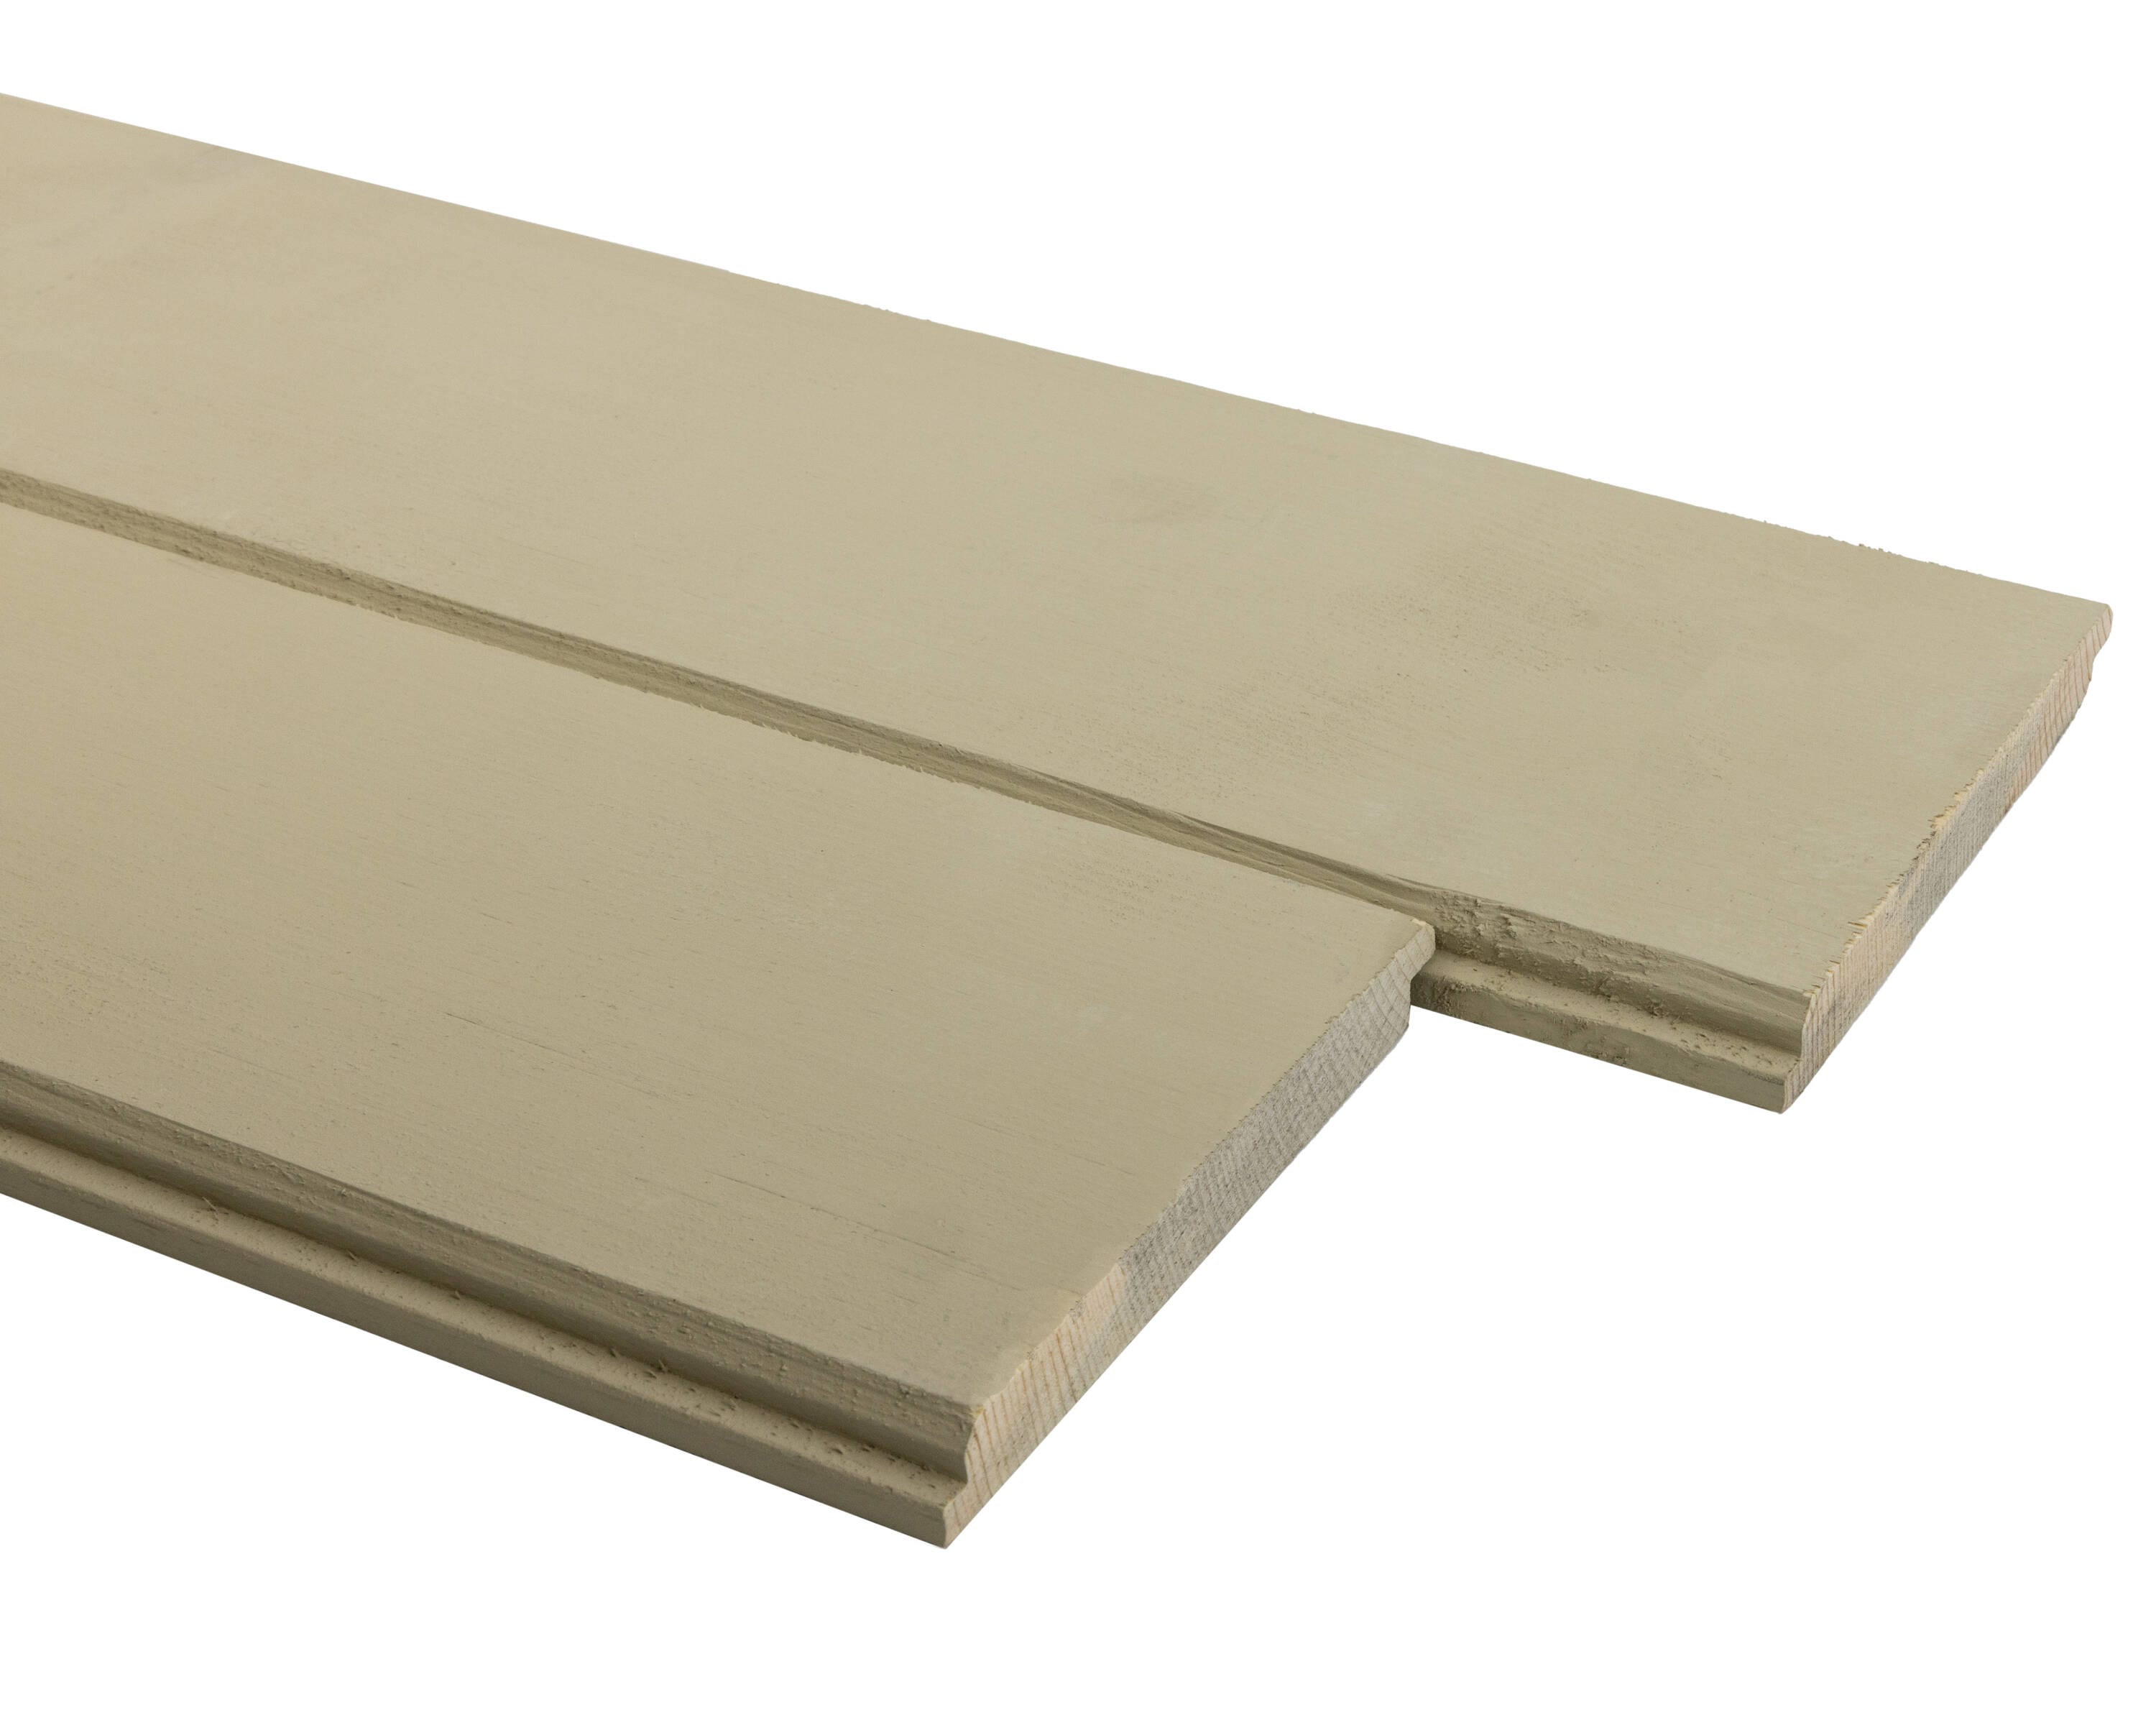 Wholesale mdf craft board For An Economical But Sturdy Wood Option 